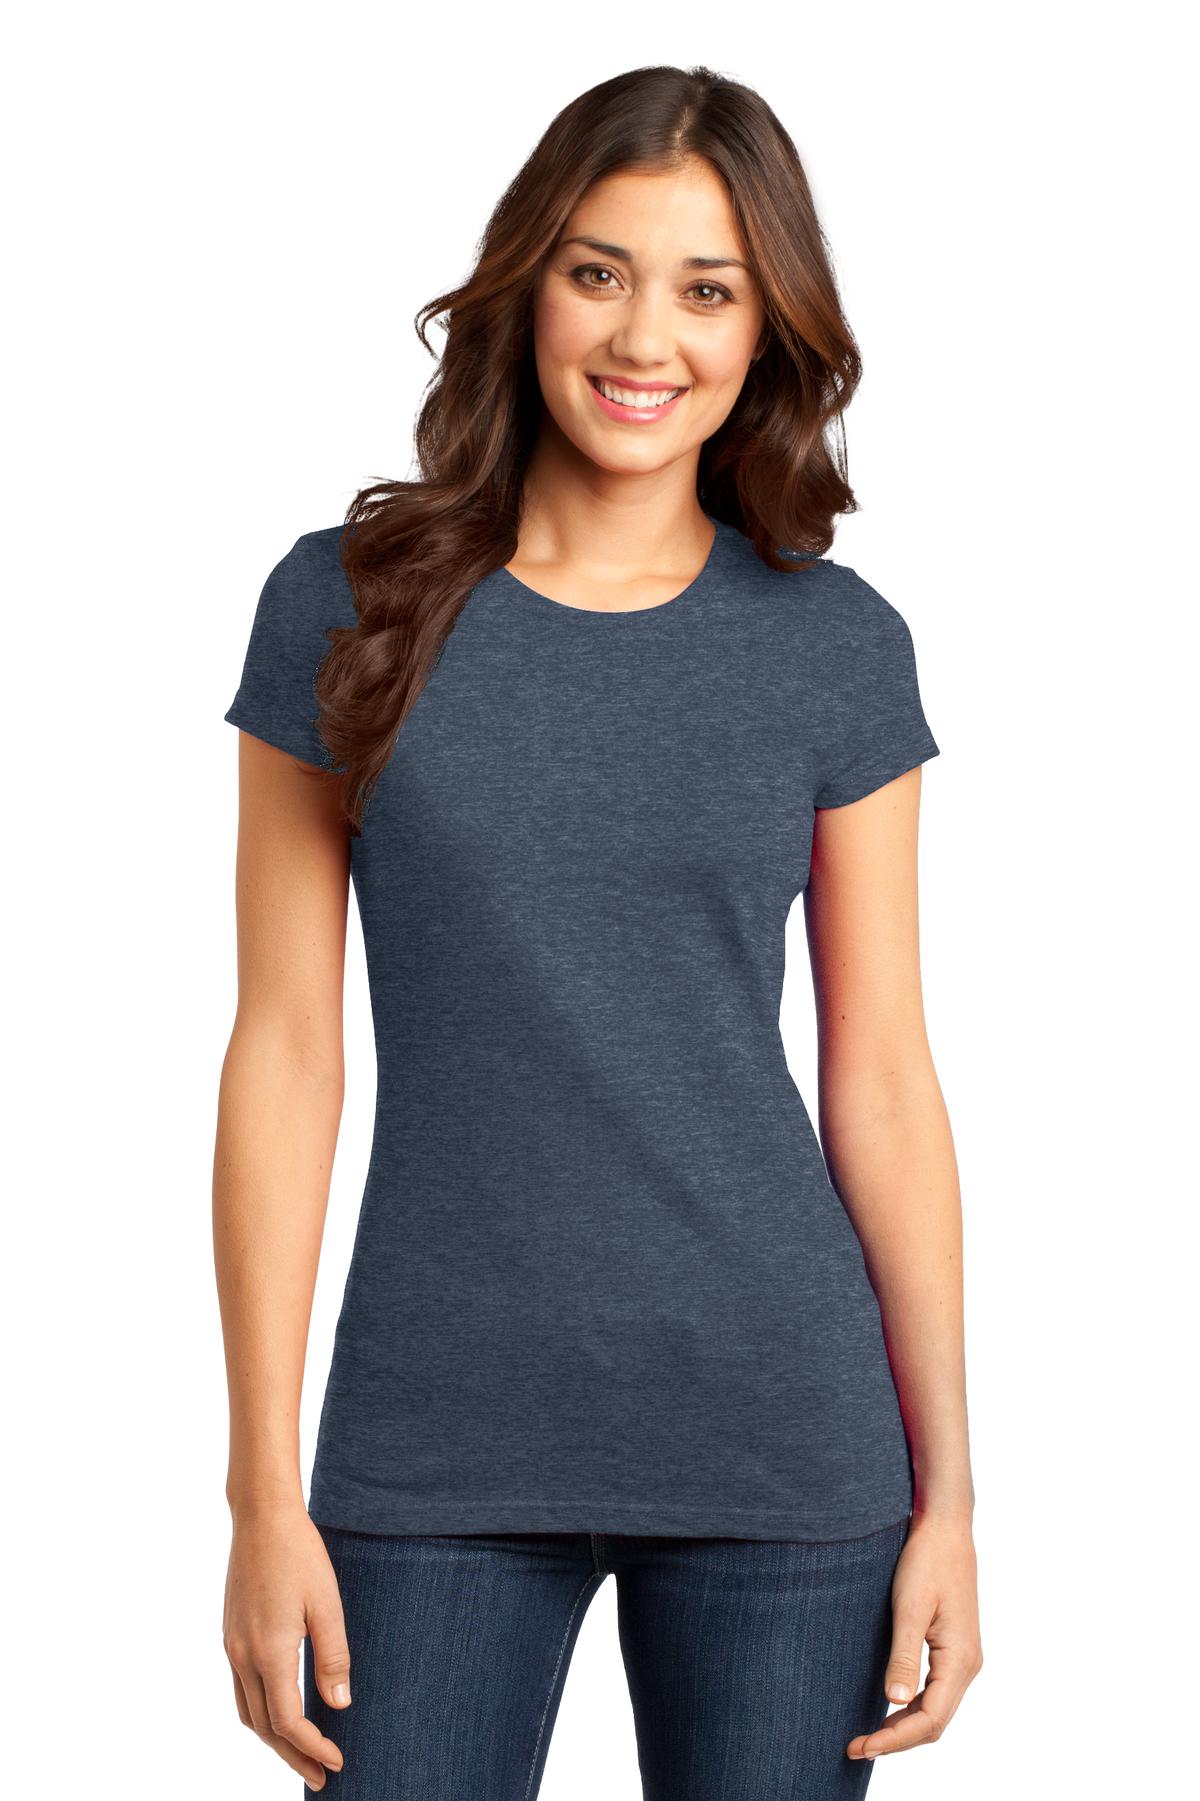 District DT6001 Heather Navy Ladies' Fitted Very Important Tee